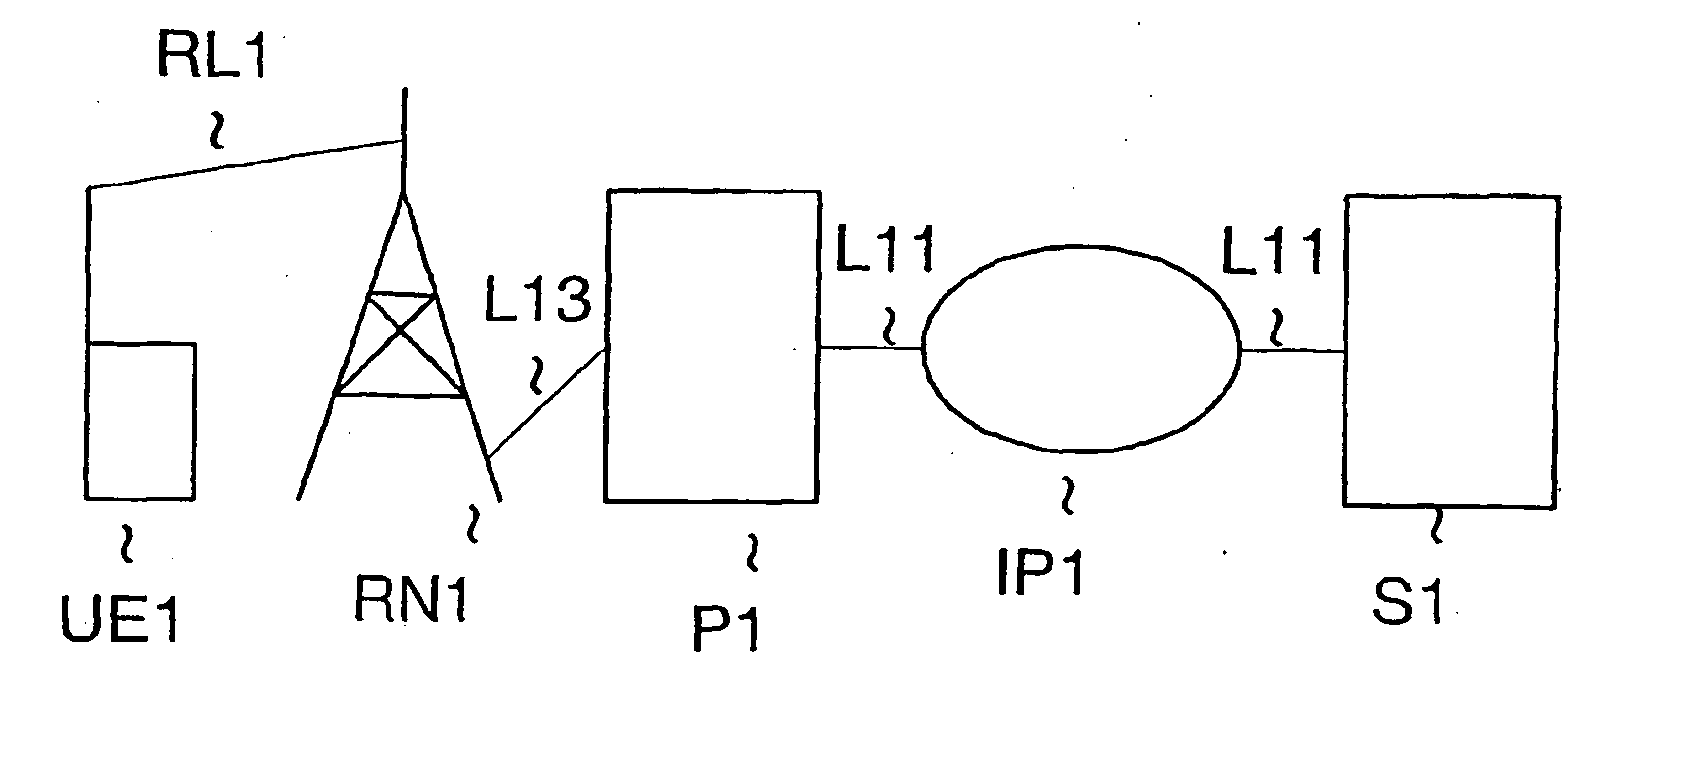 Method for calculating a transmission window size